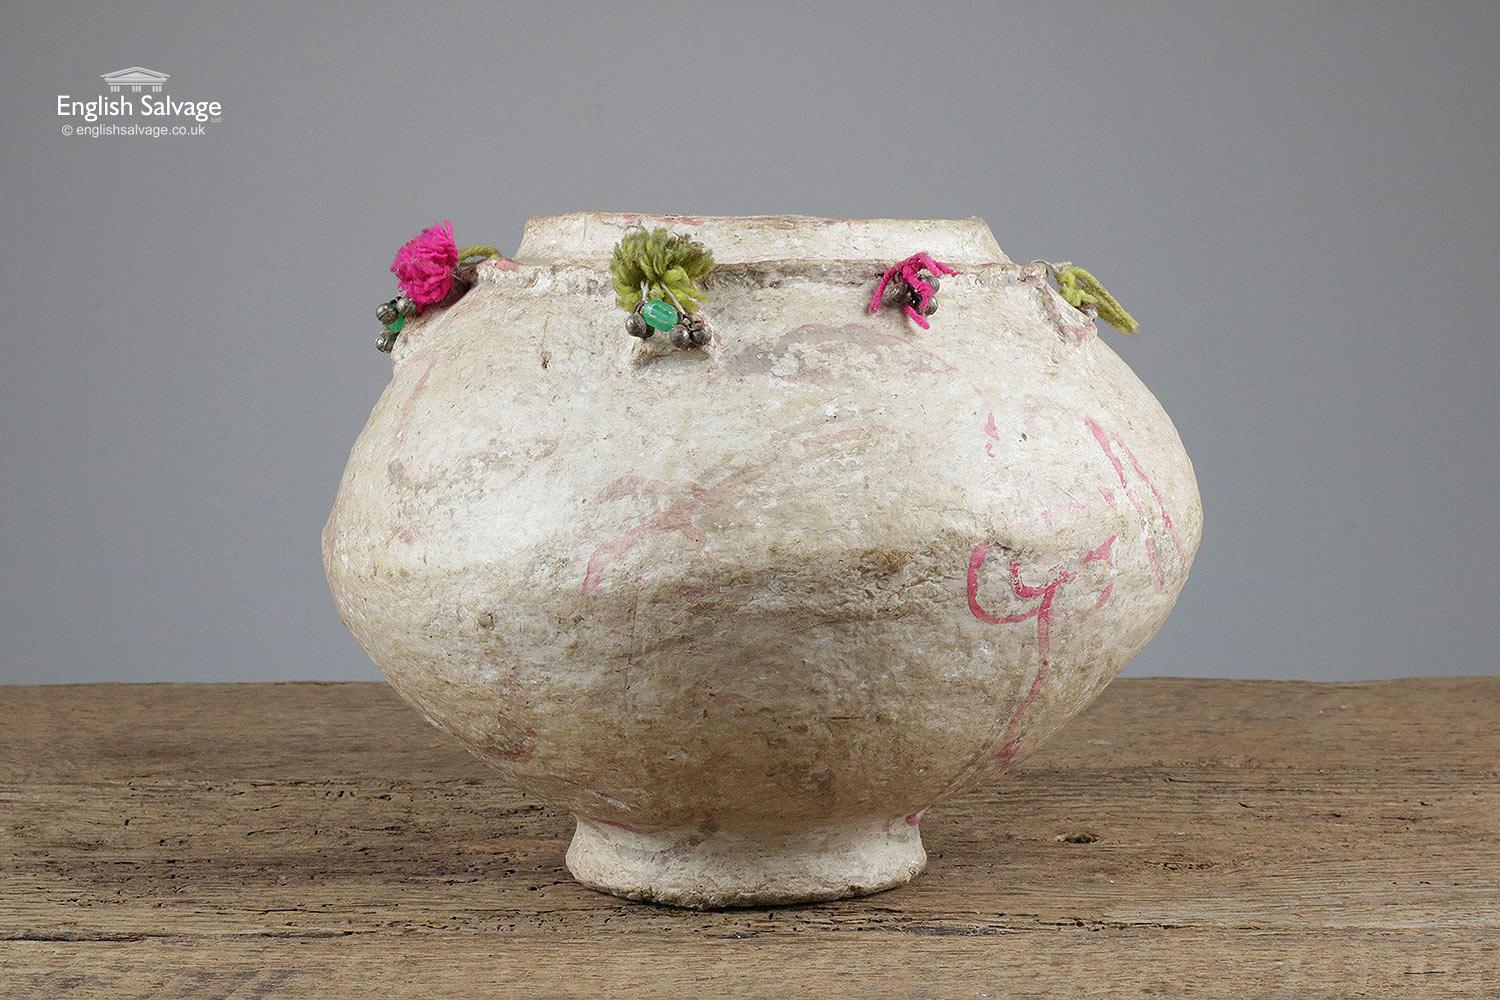 Unusual reclaimed cream or beige papier mâché pot with pink highlights and pink and green beading and yard decoration around the rim. The pot has a rustic appearance.